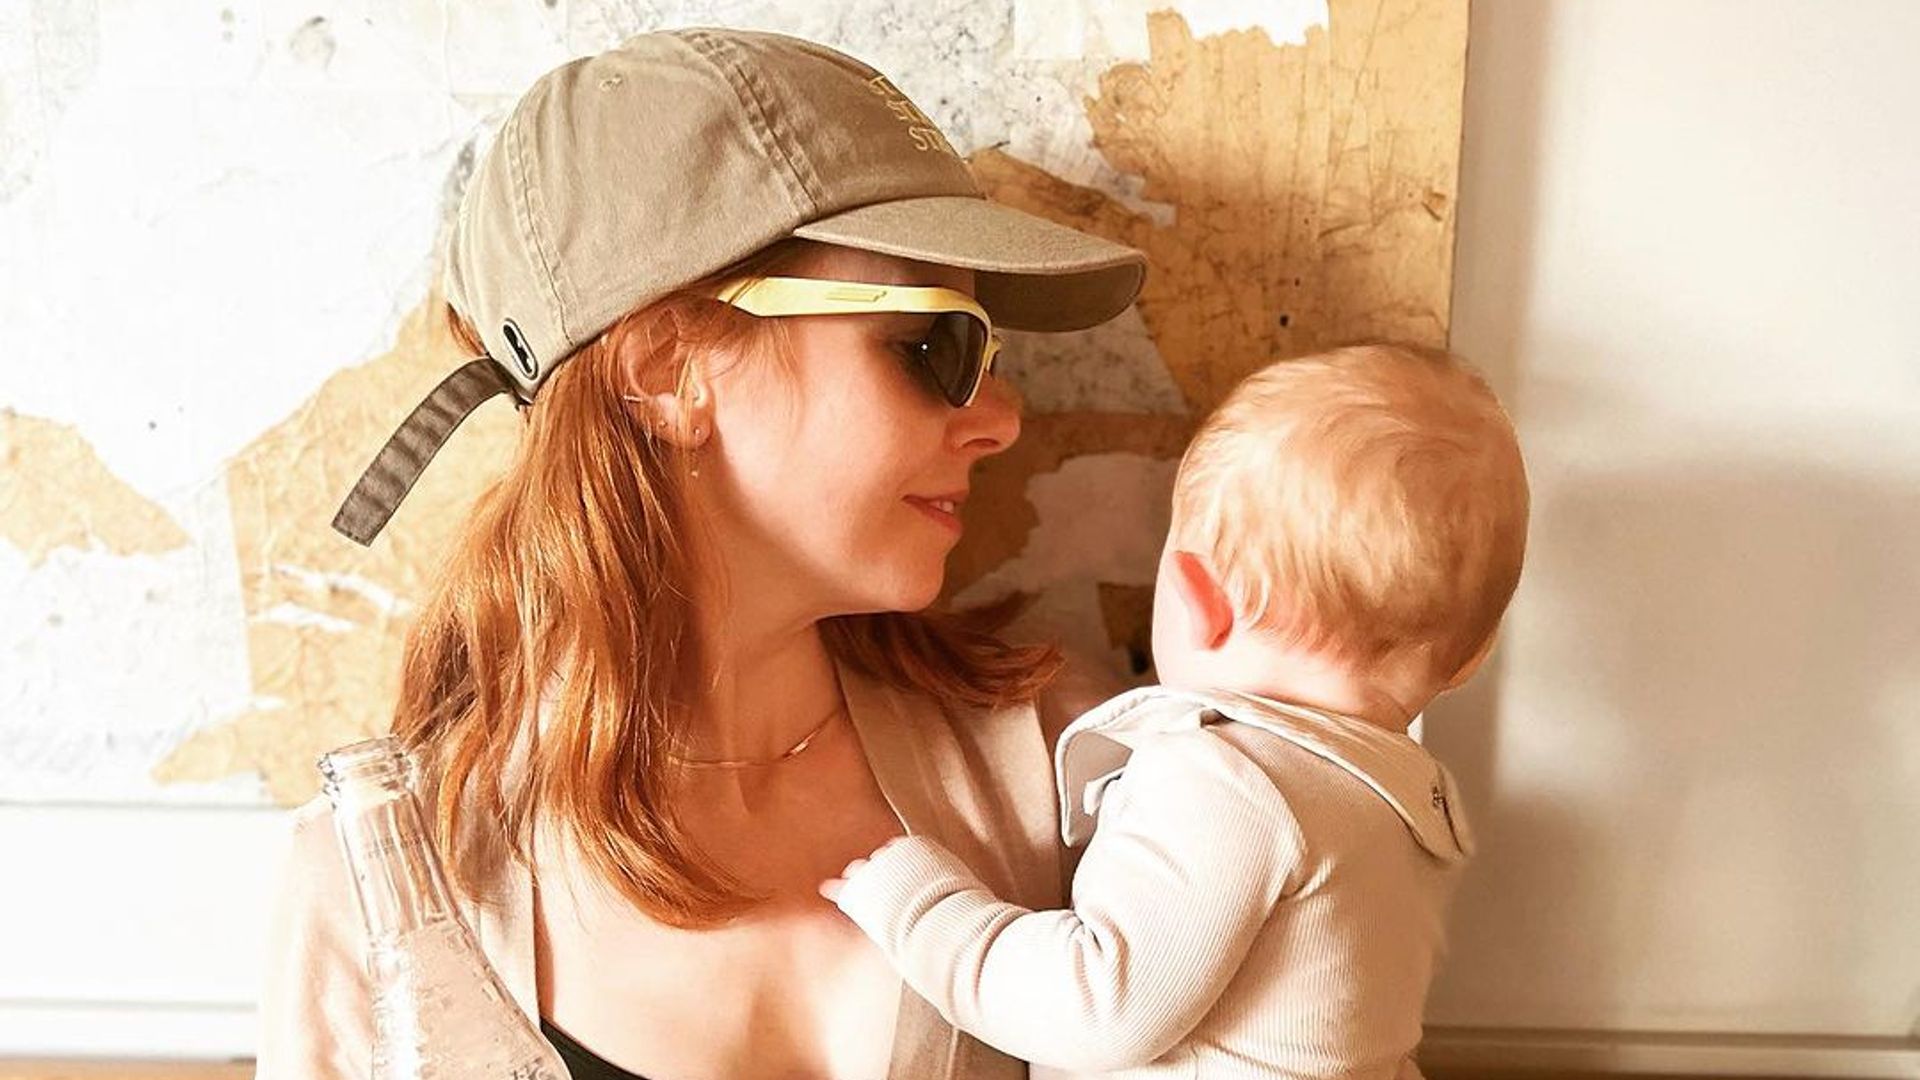 Stacey Dooley shares emotional insight into relationship with daughter Minnie